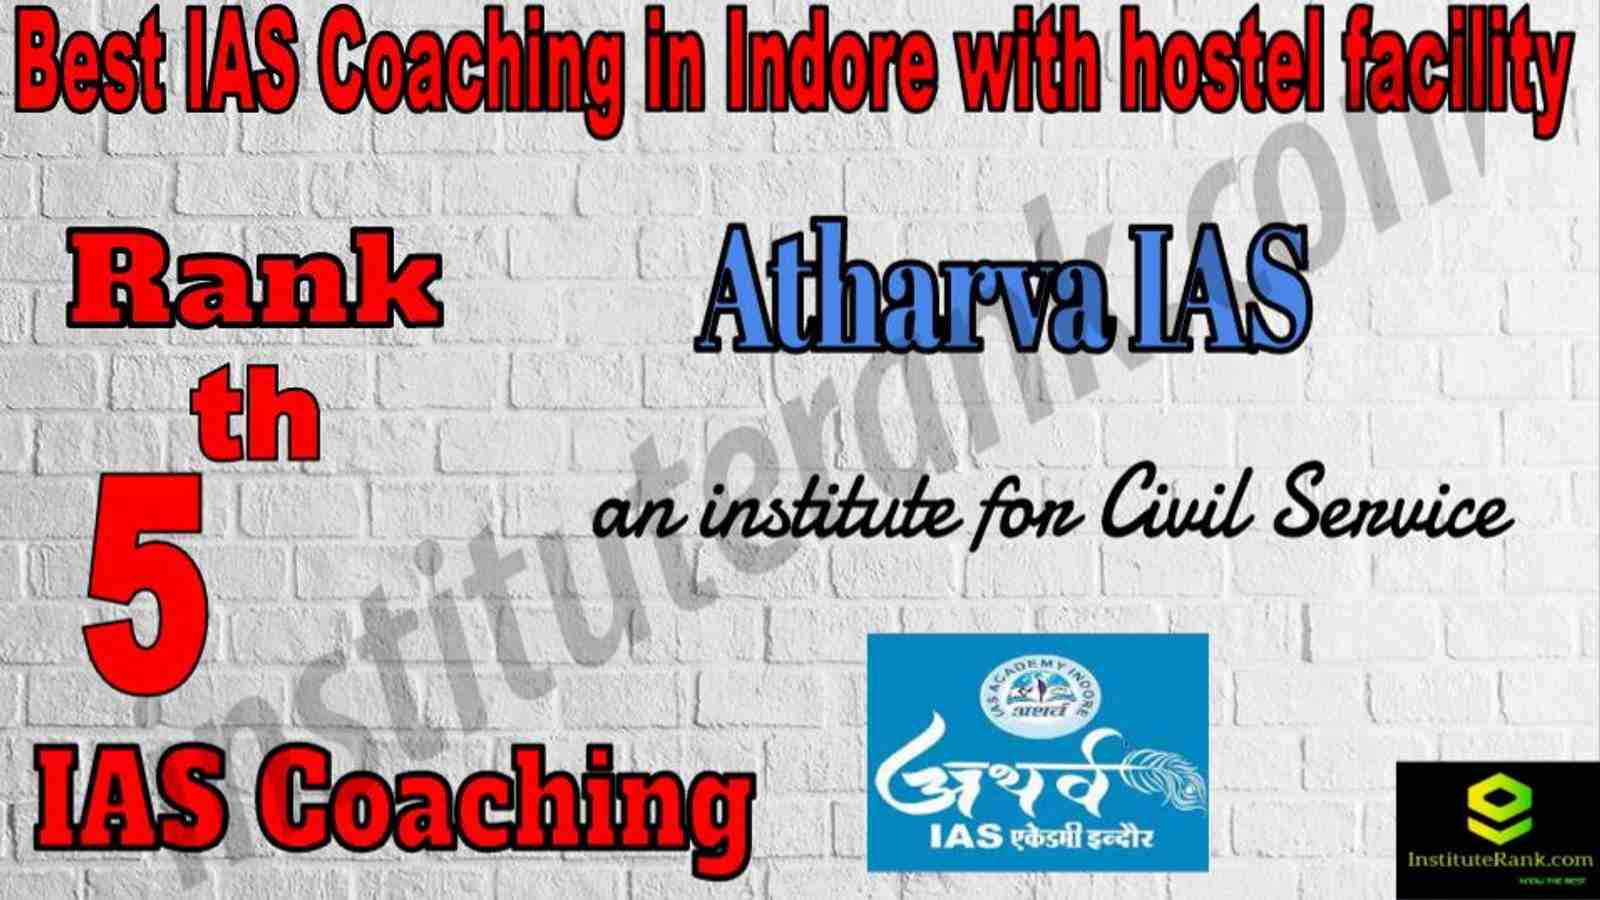 5th Best IAS Coaching in Indore with hostel Facility